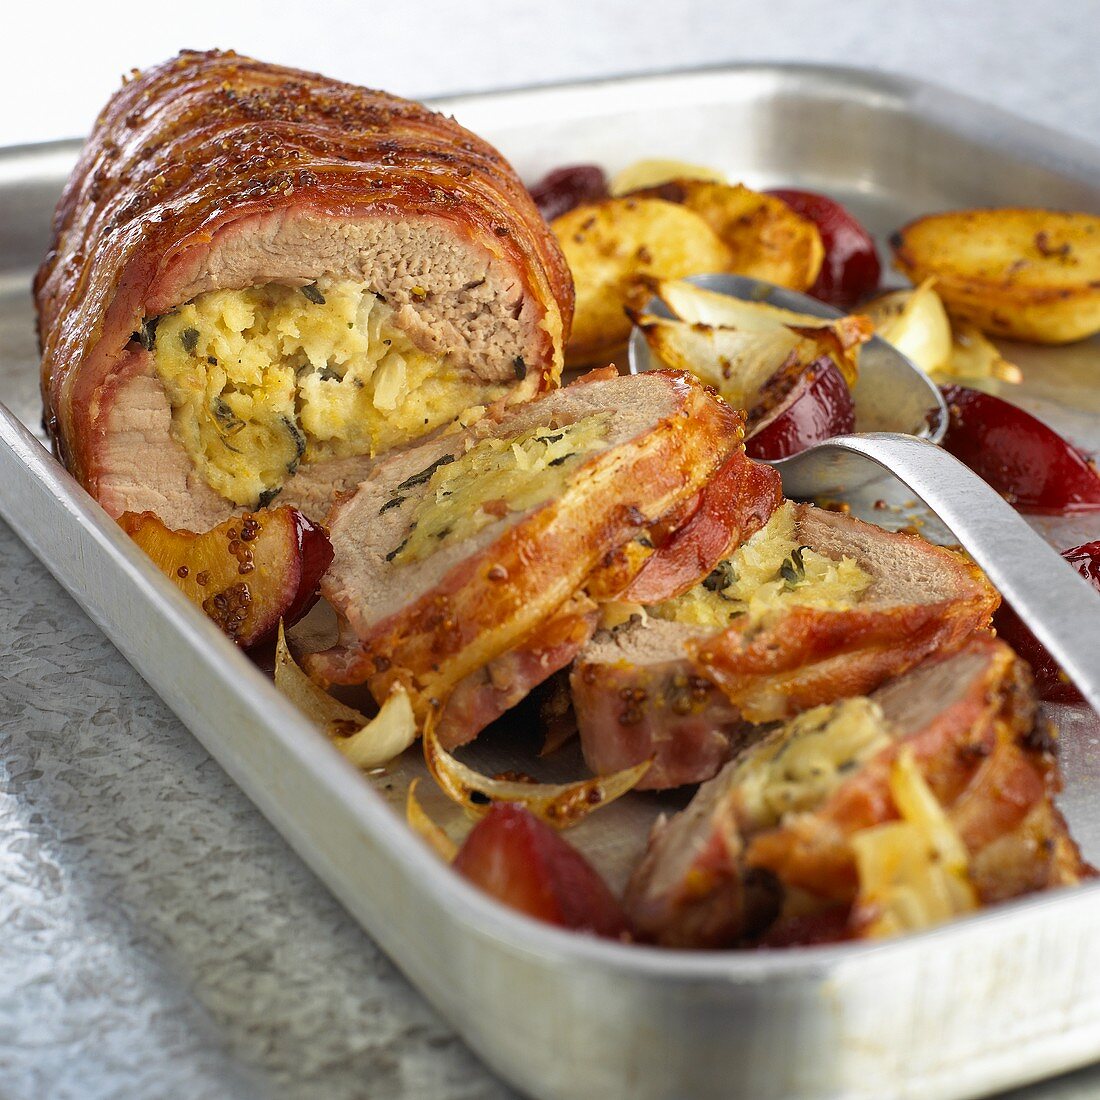 Stuffed pork fillet with baked plums